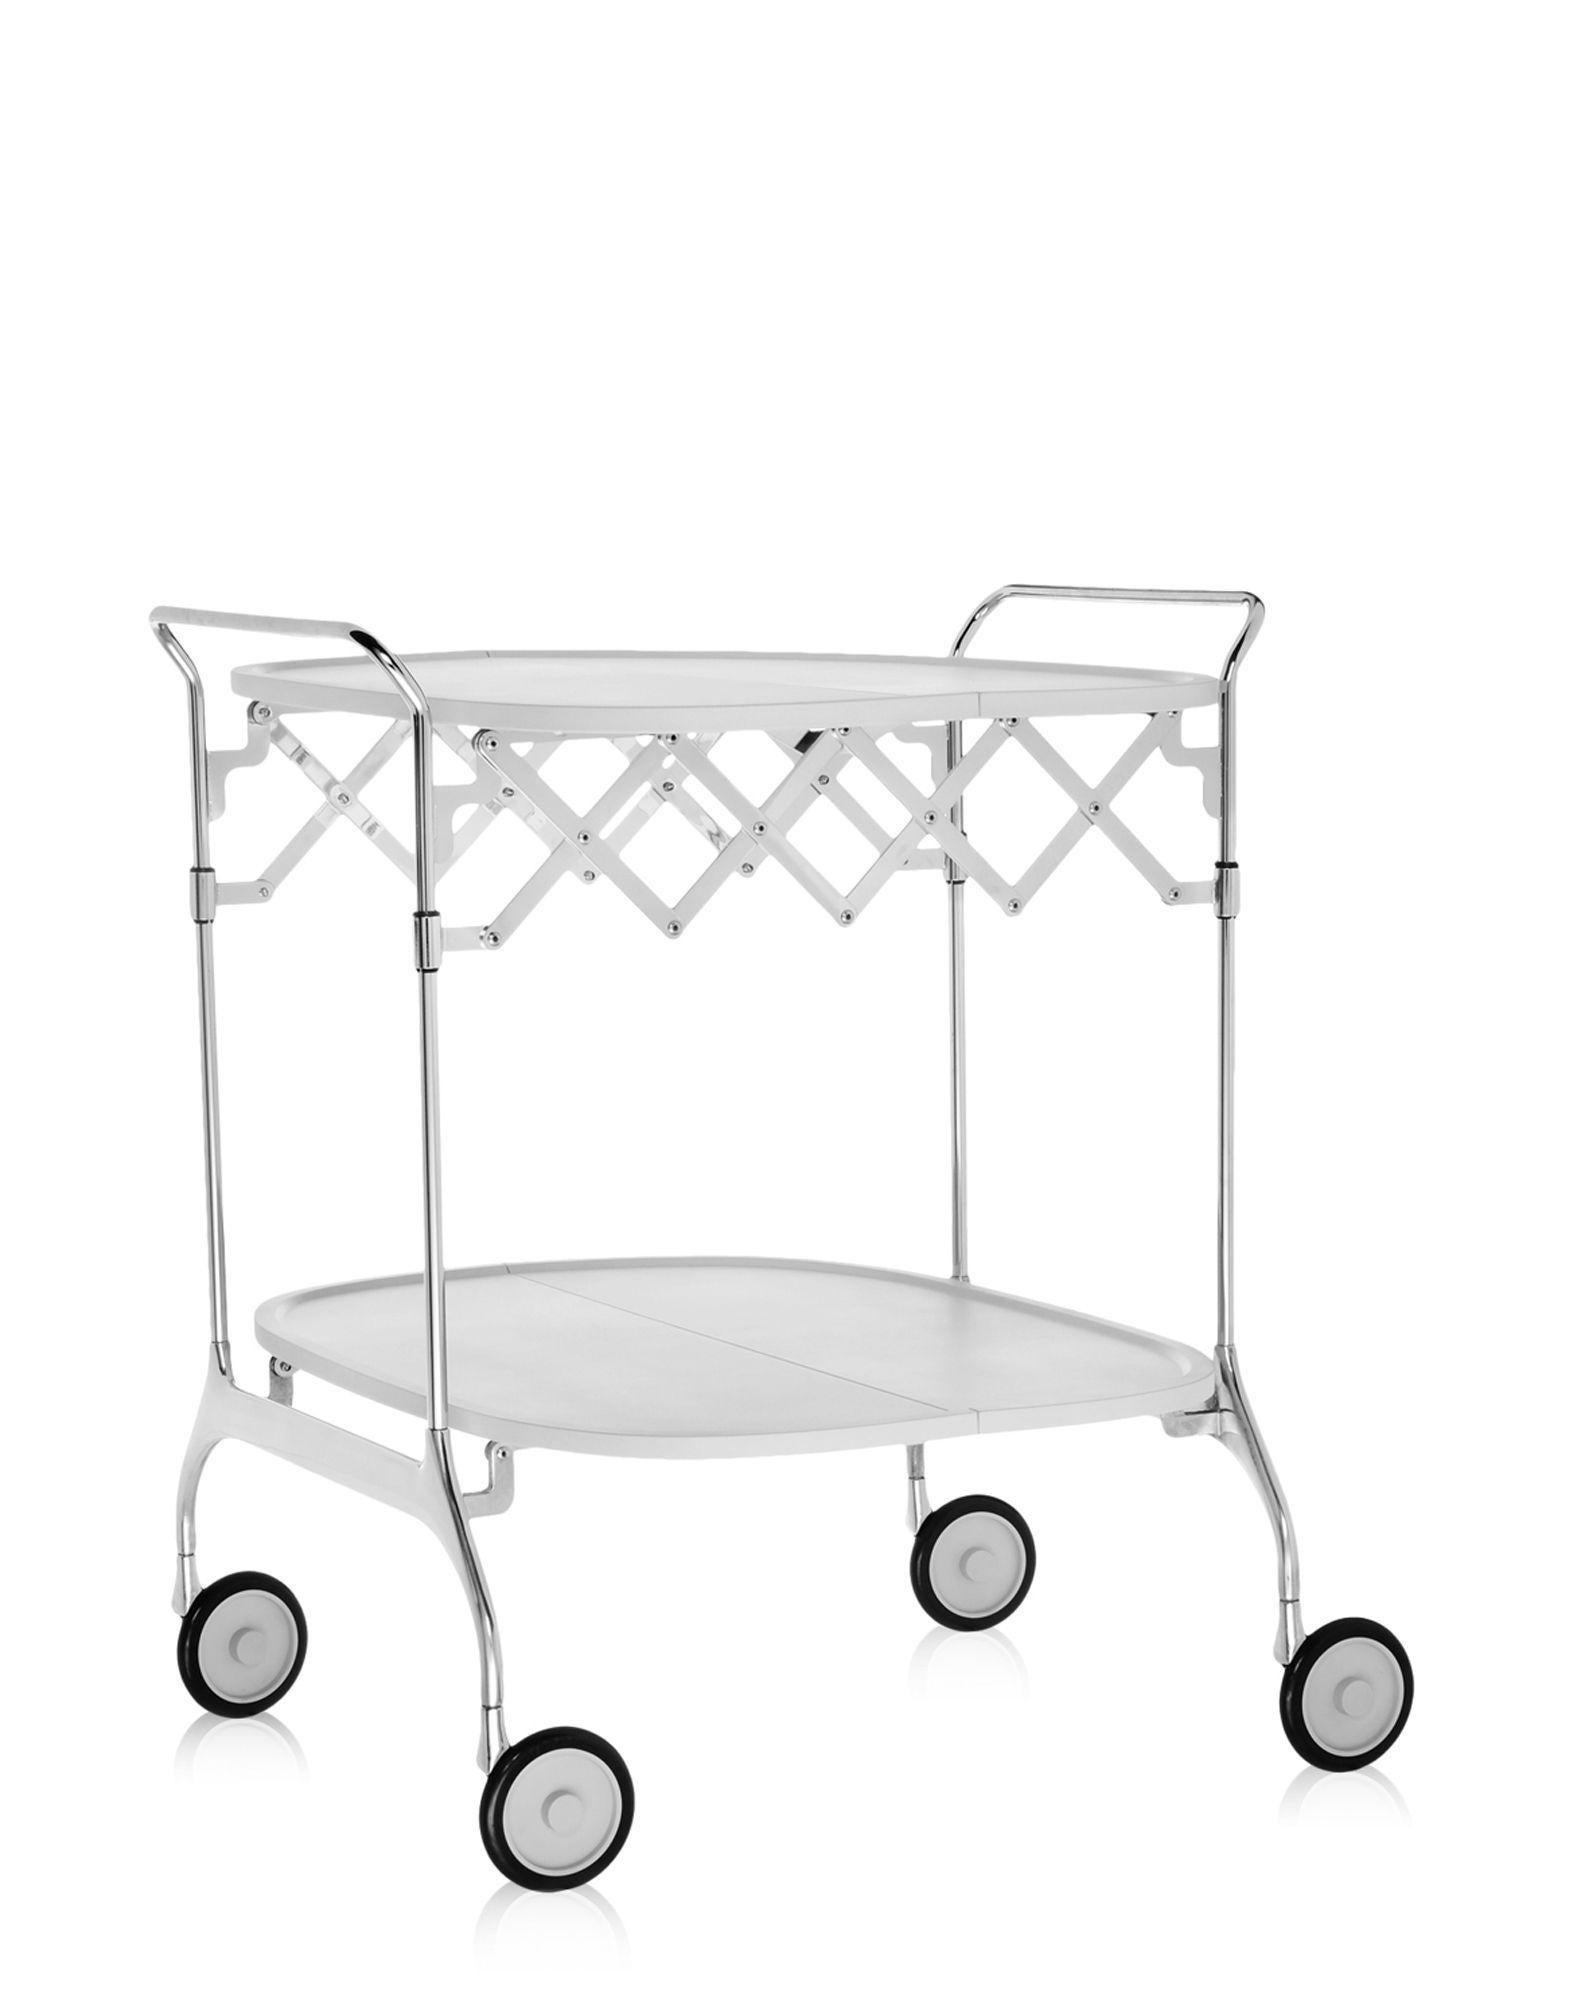 Gastone is an elegant and practical folding trolley with varnished plastic top surface and chromed steel support. The castors are a formal feature and ensure functional mobility. Once closed, it has a depth of 23 cm. It can be conveniently and